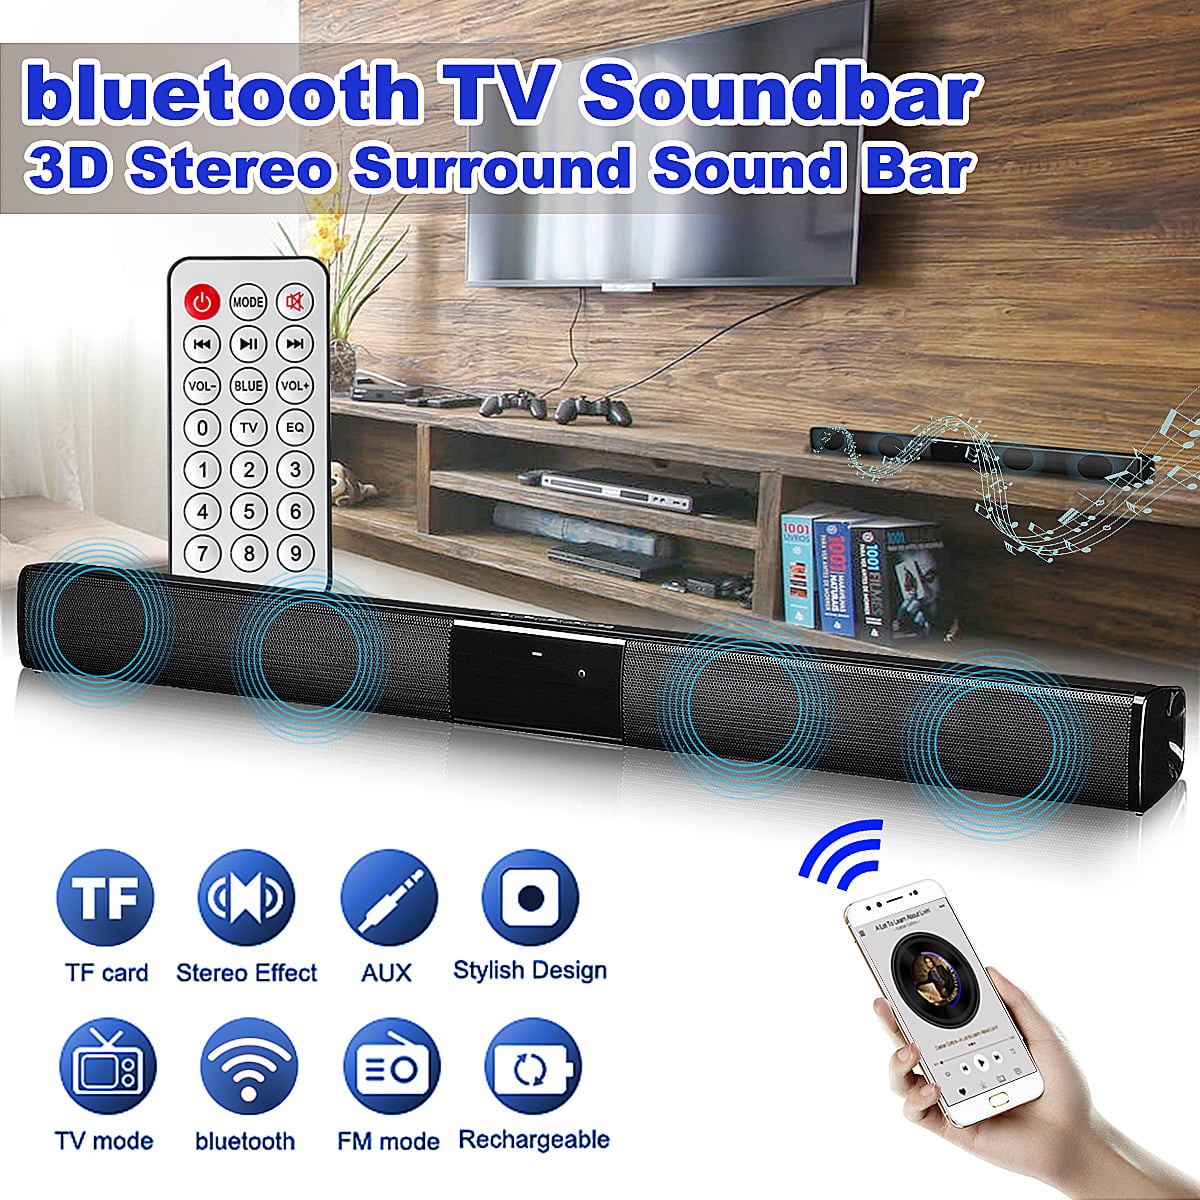 is a soundbar stereo or surround